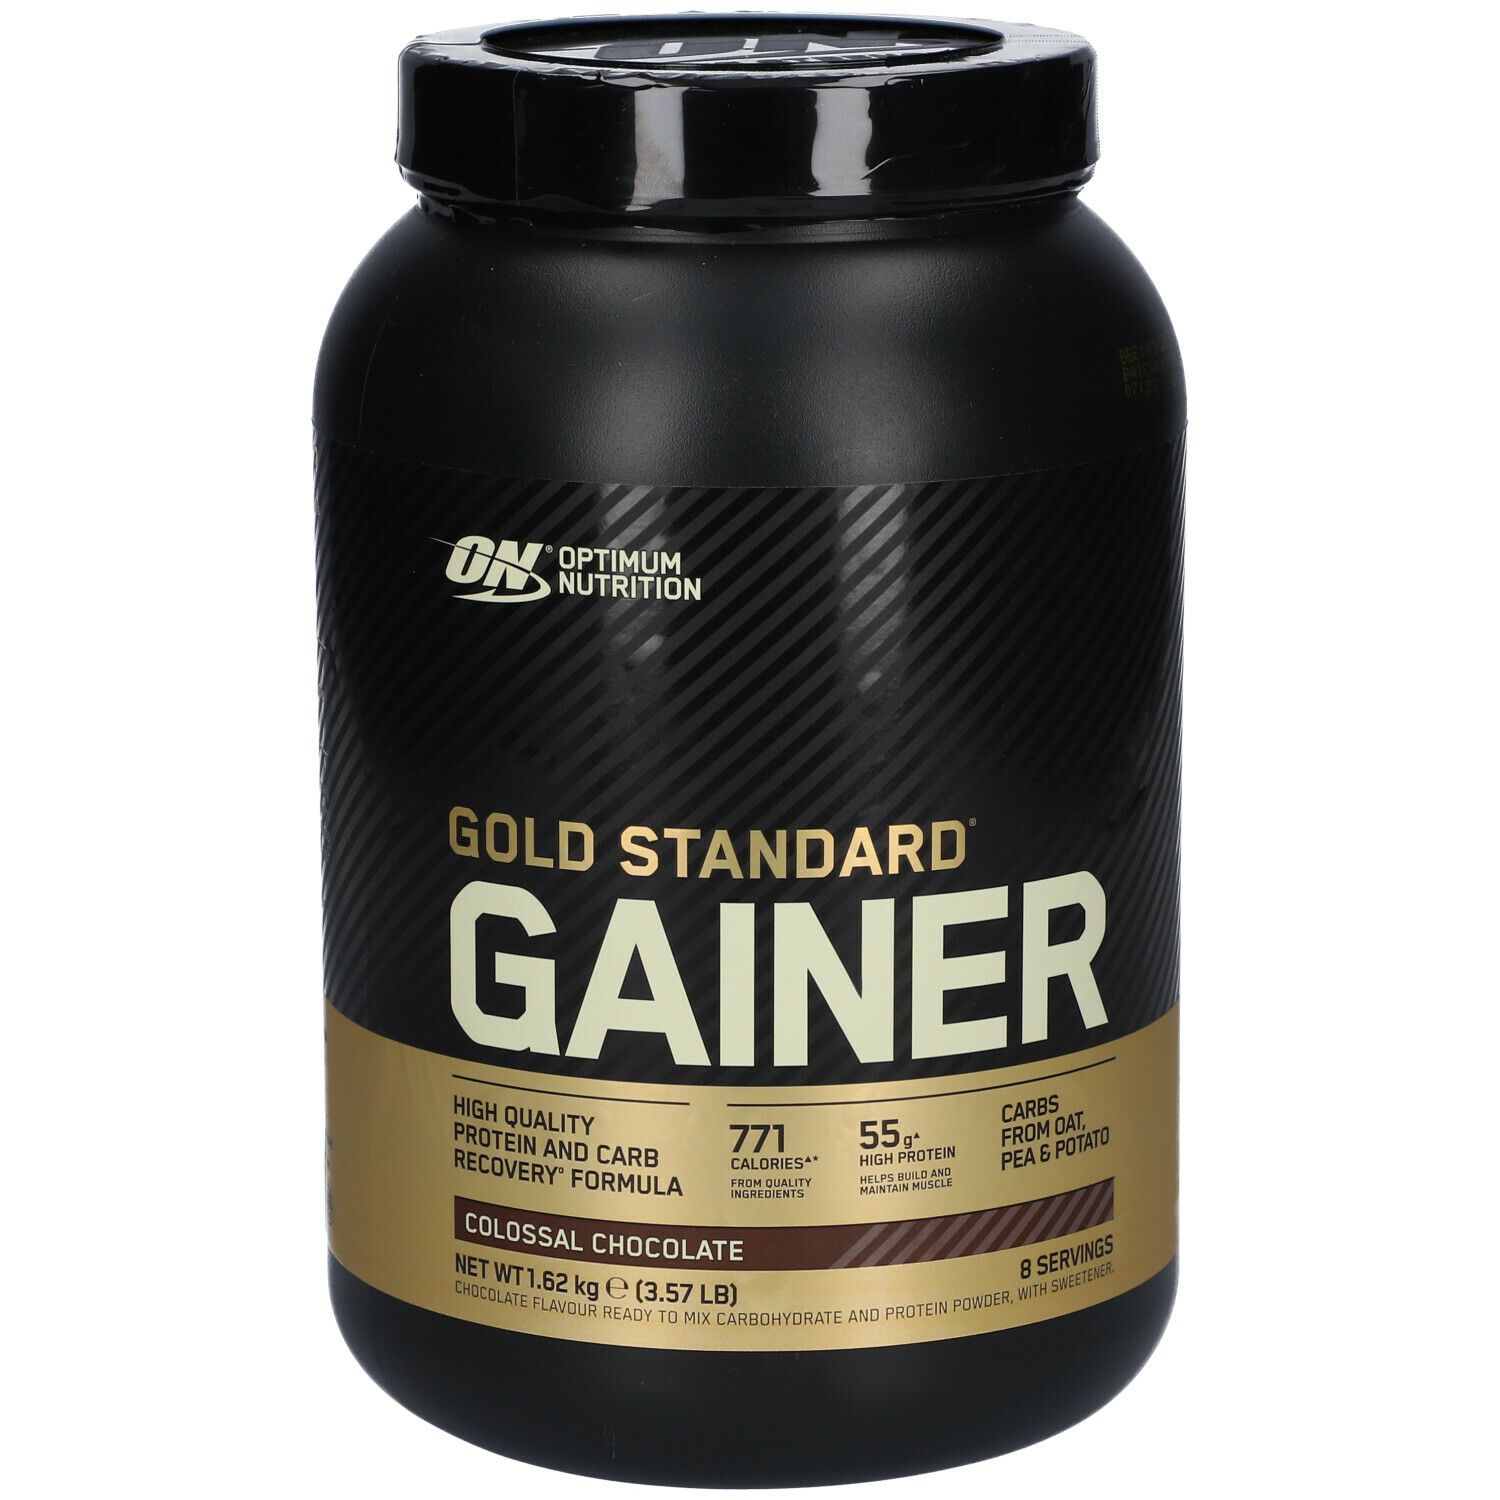 Optimum Nutrition Gold Standard Gainer, Colossal Chocolate